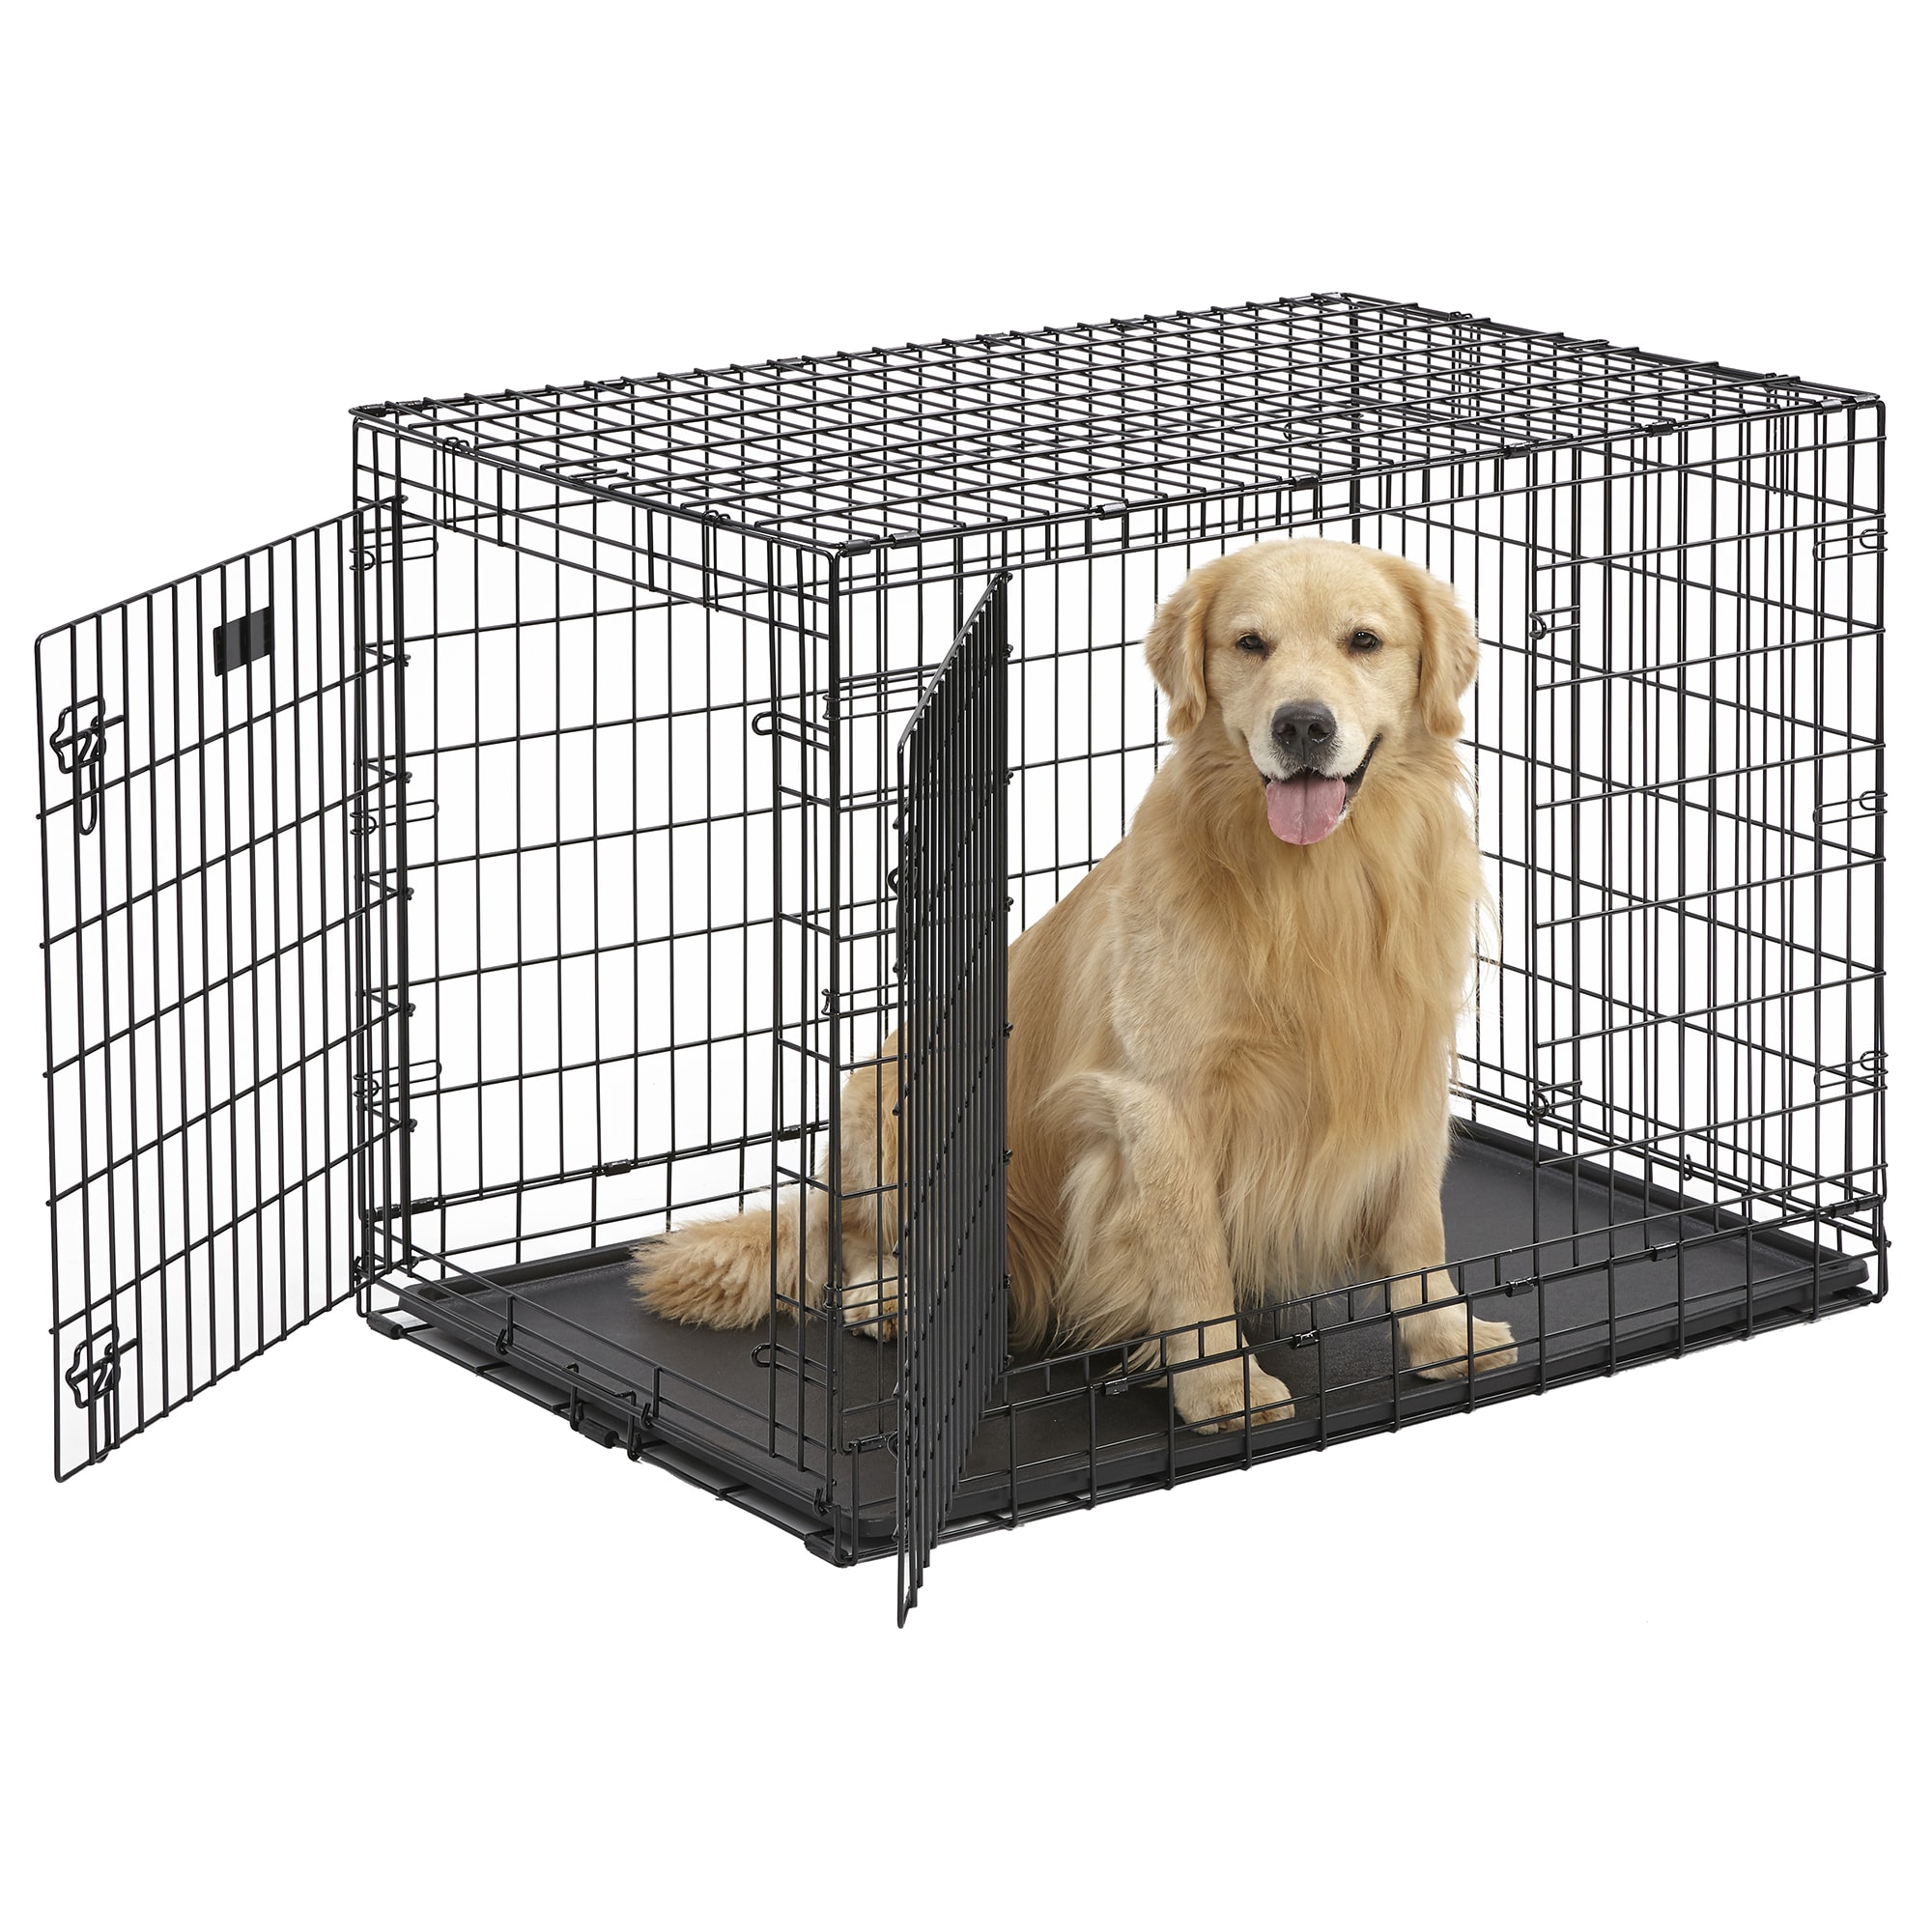 midwest-ultima-pro-double-door-dog-crate-42-l-x-28-w-x-32-h-petco